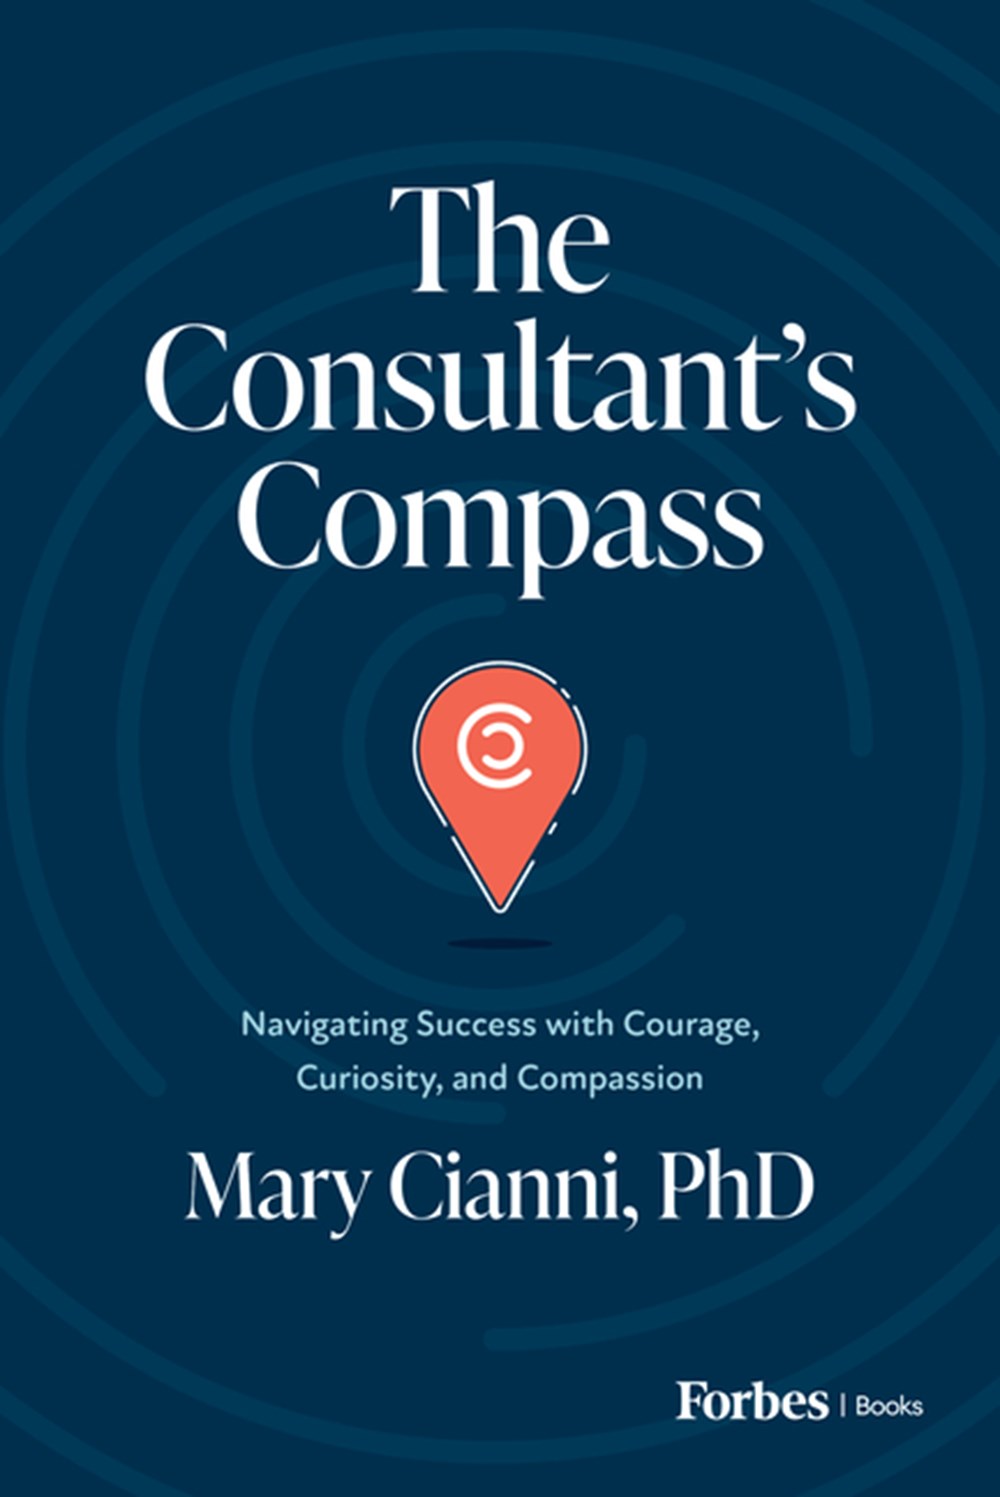 Consultant's Compass: Navigating Success with Courage, Curiosity, and Compassion